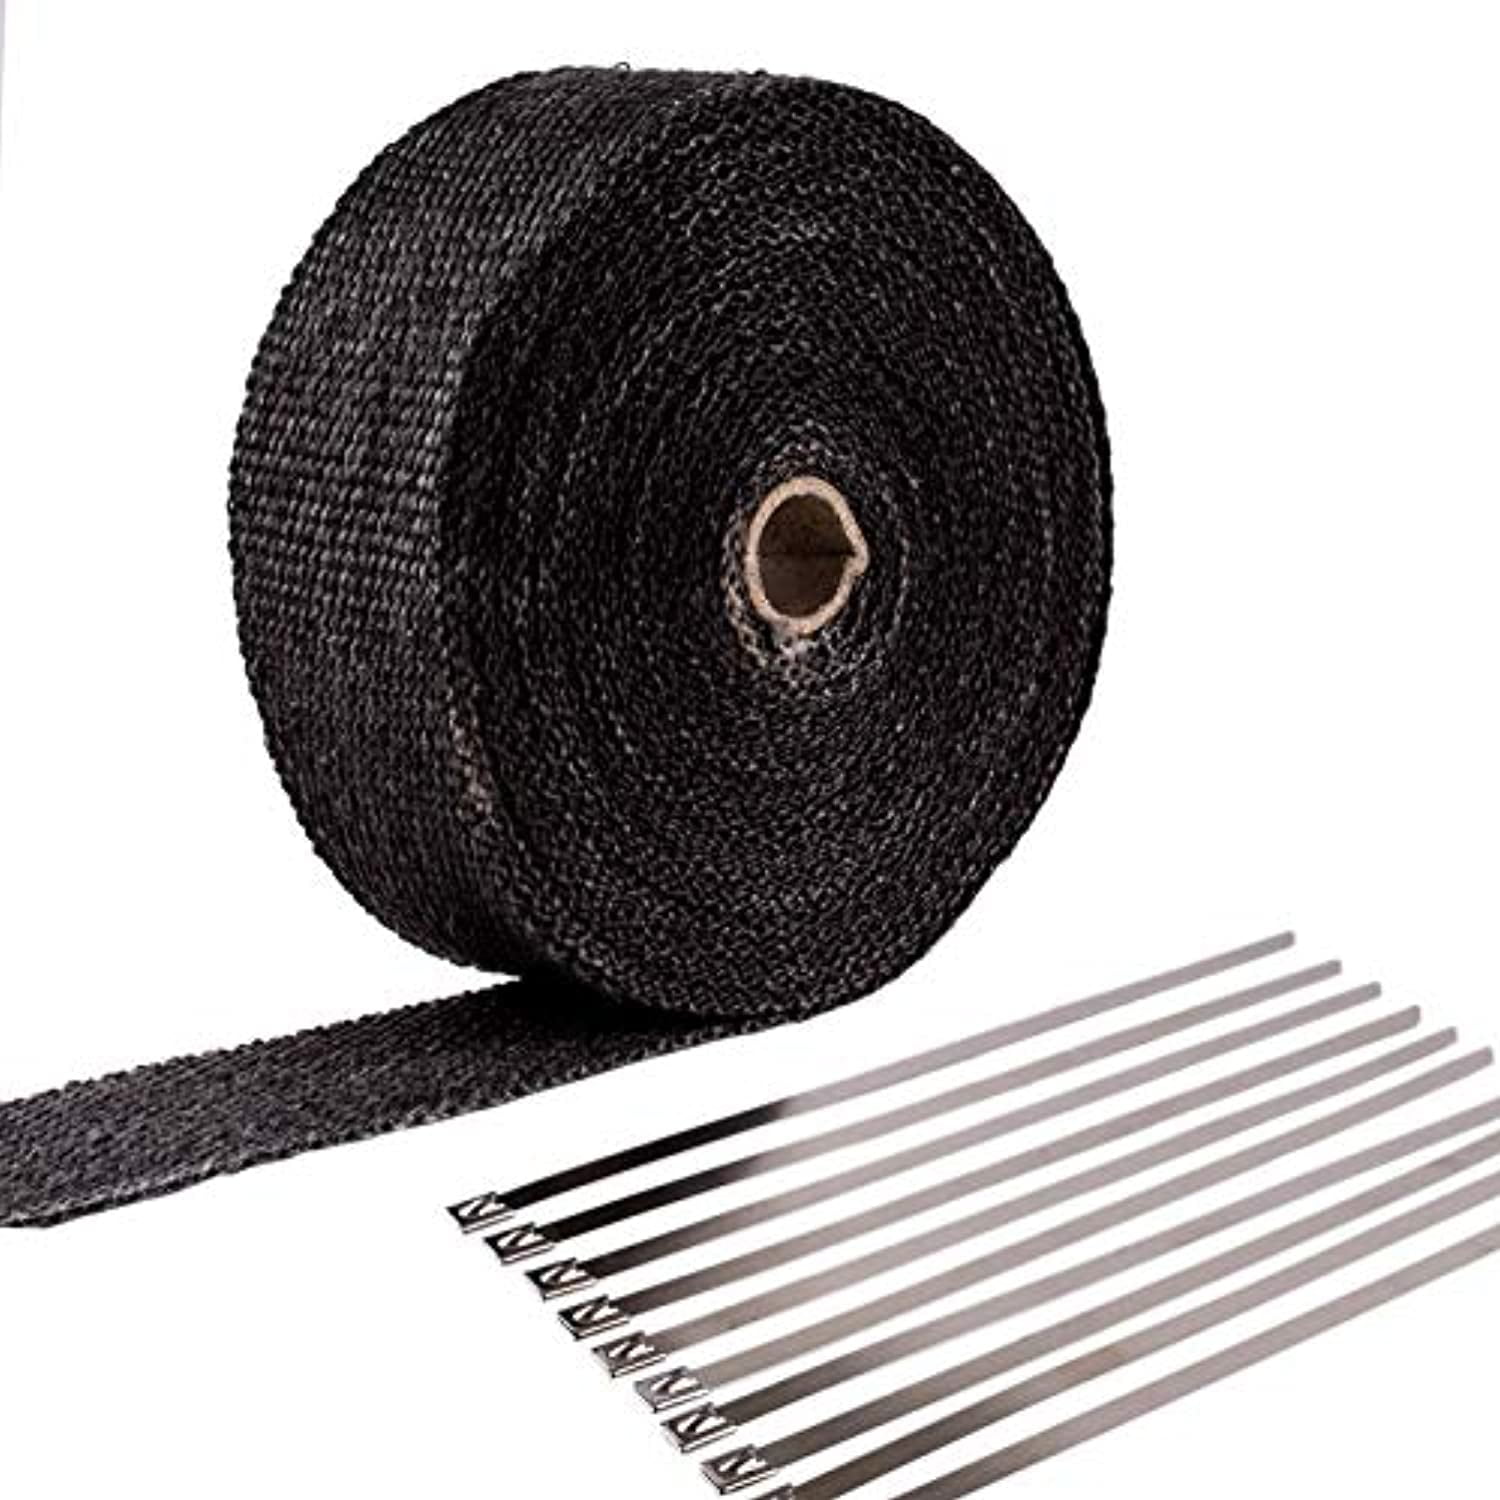 2 x 50 Black Exhaust Heat Wrap Roll Kit for Motorcycle Fiberglass Heat Shield Tape with Stainless Ties 